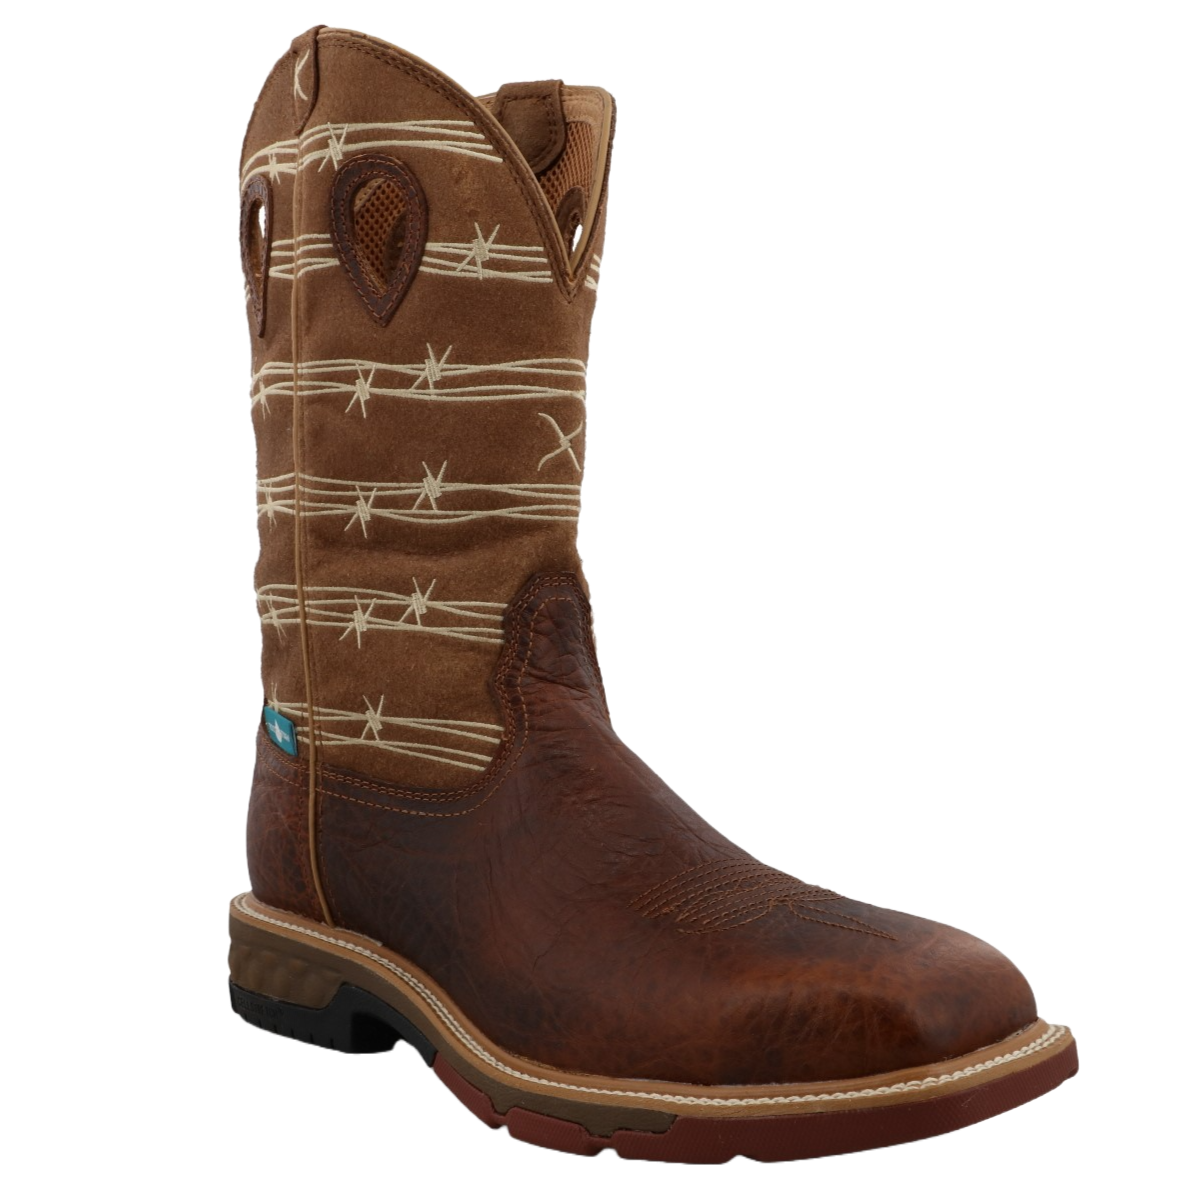 Twisted X Men's Barbwire Rustic Brown & Lion Tan Square Toe Boots MXBAW05